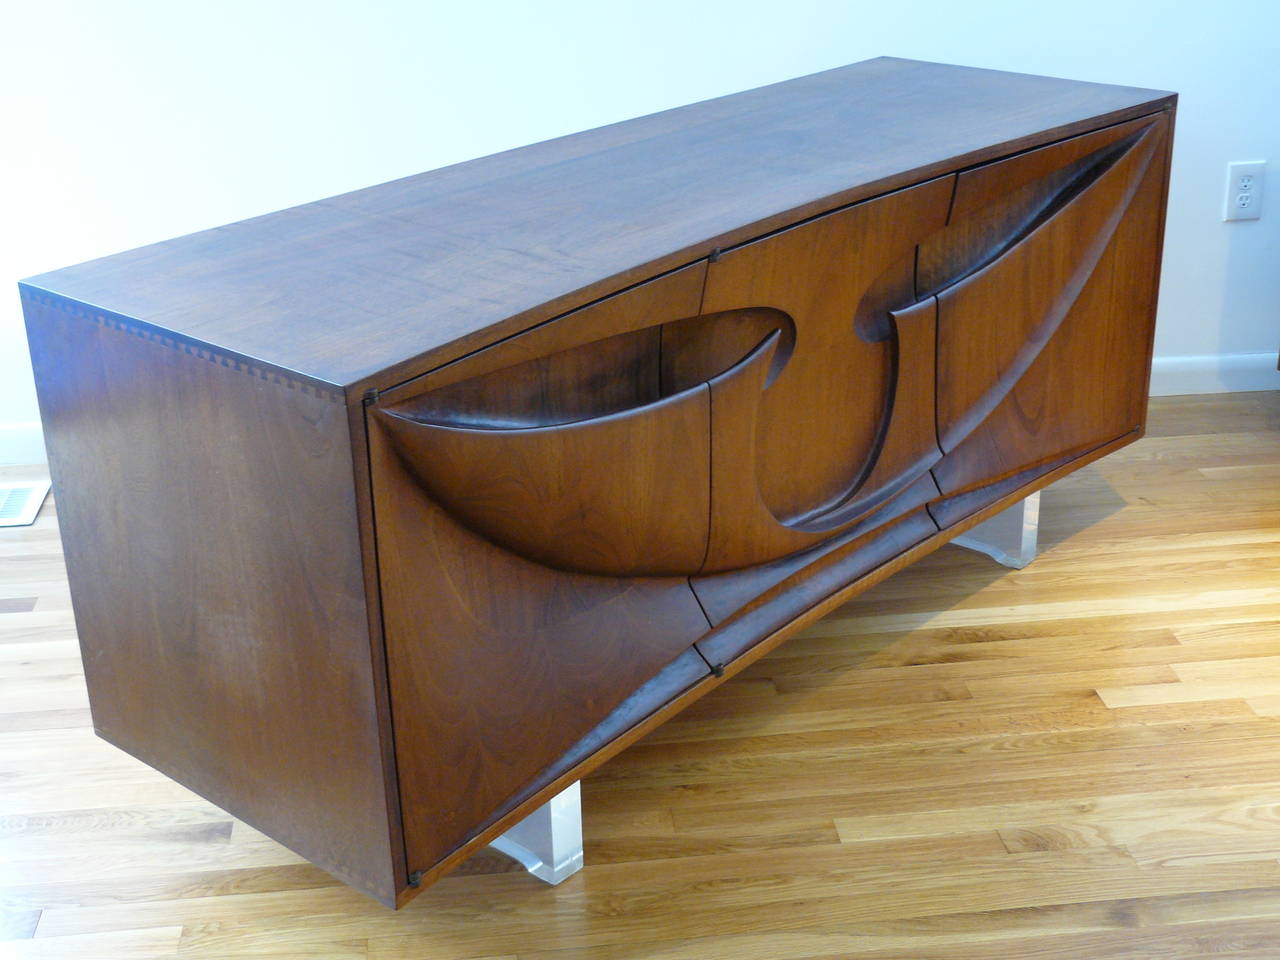 An early Michael Coffey piece, included with a signed letter from Coffey to the original owners, dated 1972.

Solid walnut, dramatic, deeply carved sculptural front and hand-cut dovetail joinery on the top and bottom of both sides. Three solid